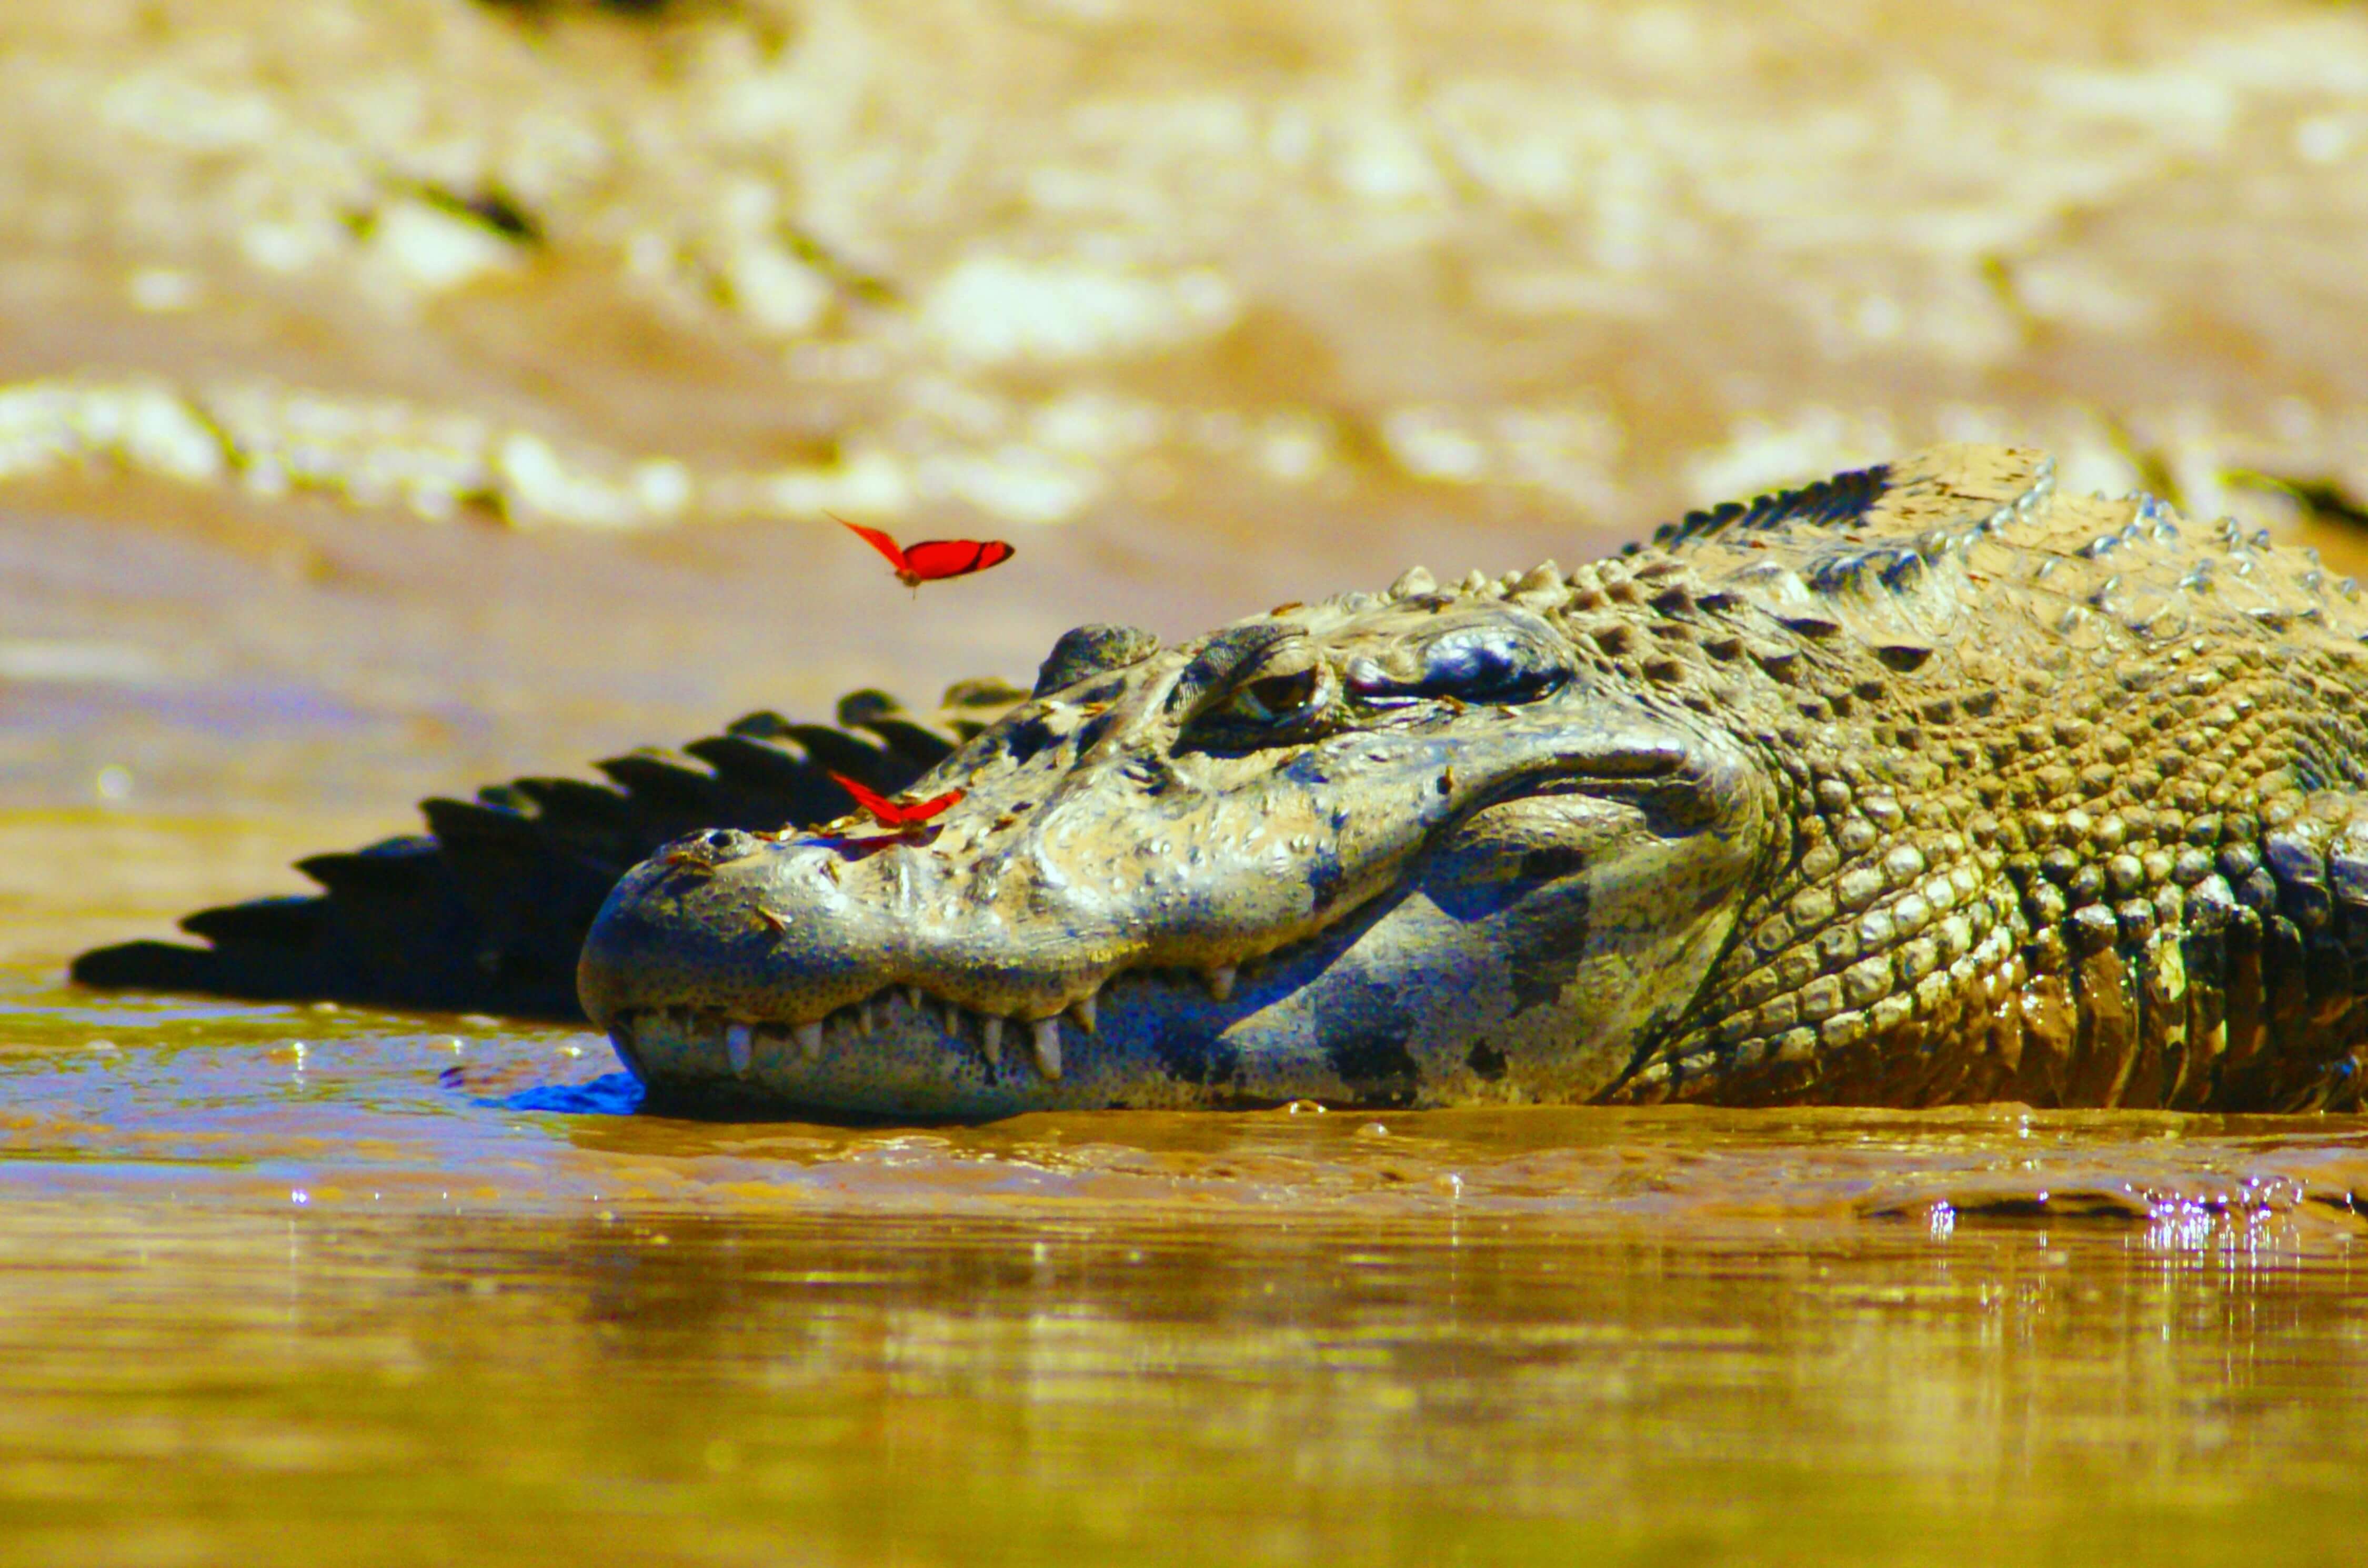 Resting crocodile depicting a force of nature